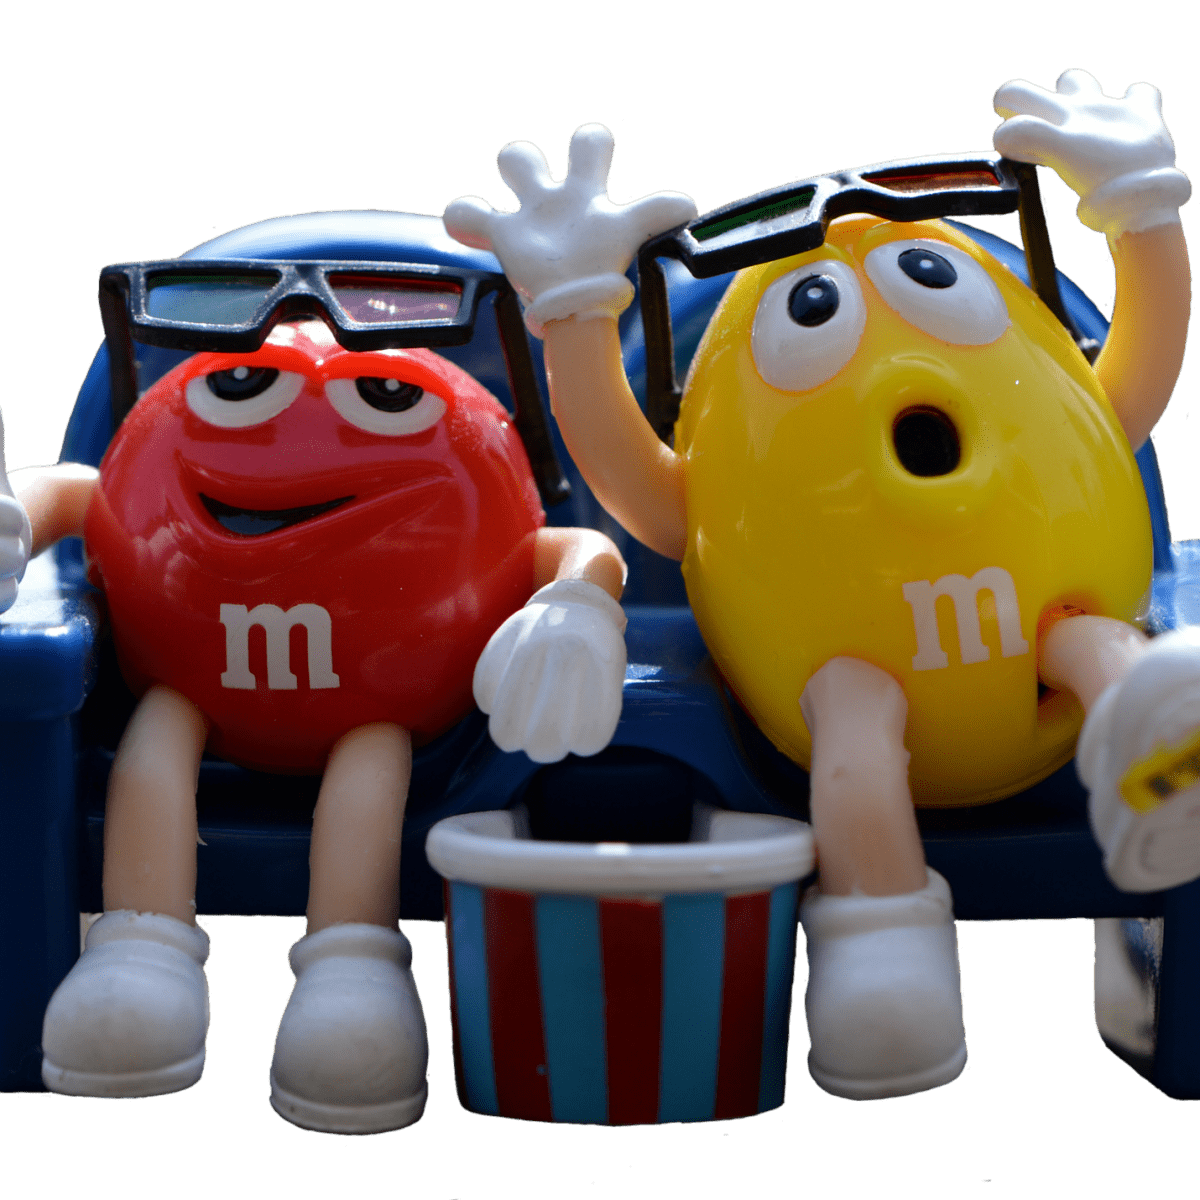 Do you know what individual M&M's candies are called